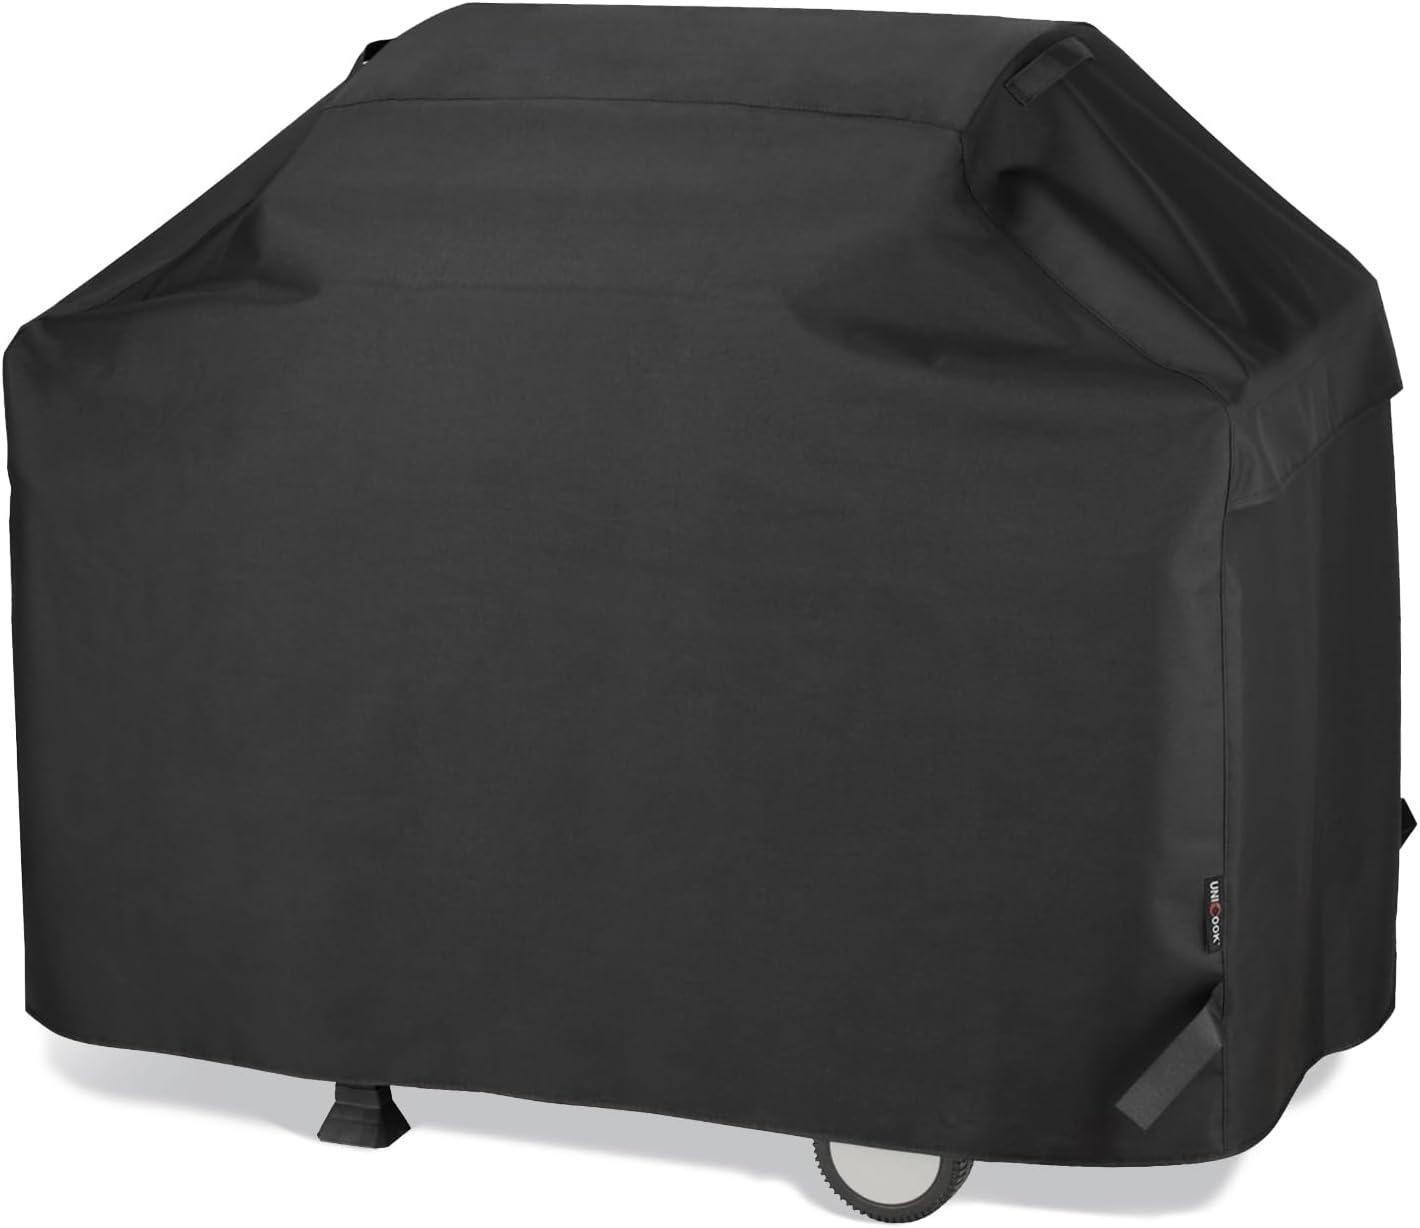 UNICOOK 60 BBQ Grill Cover